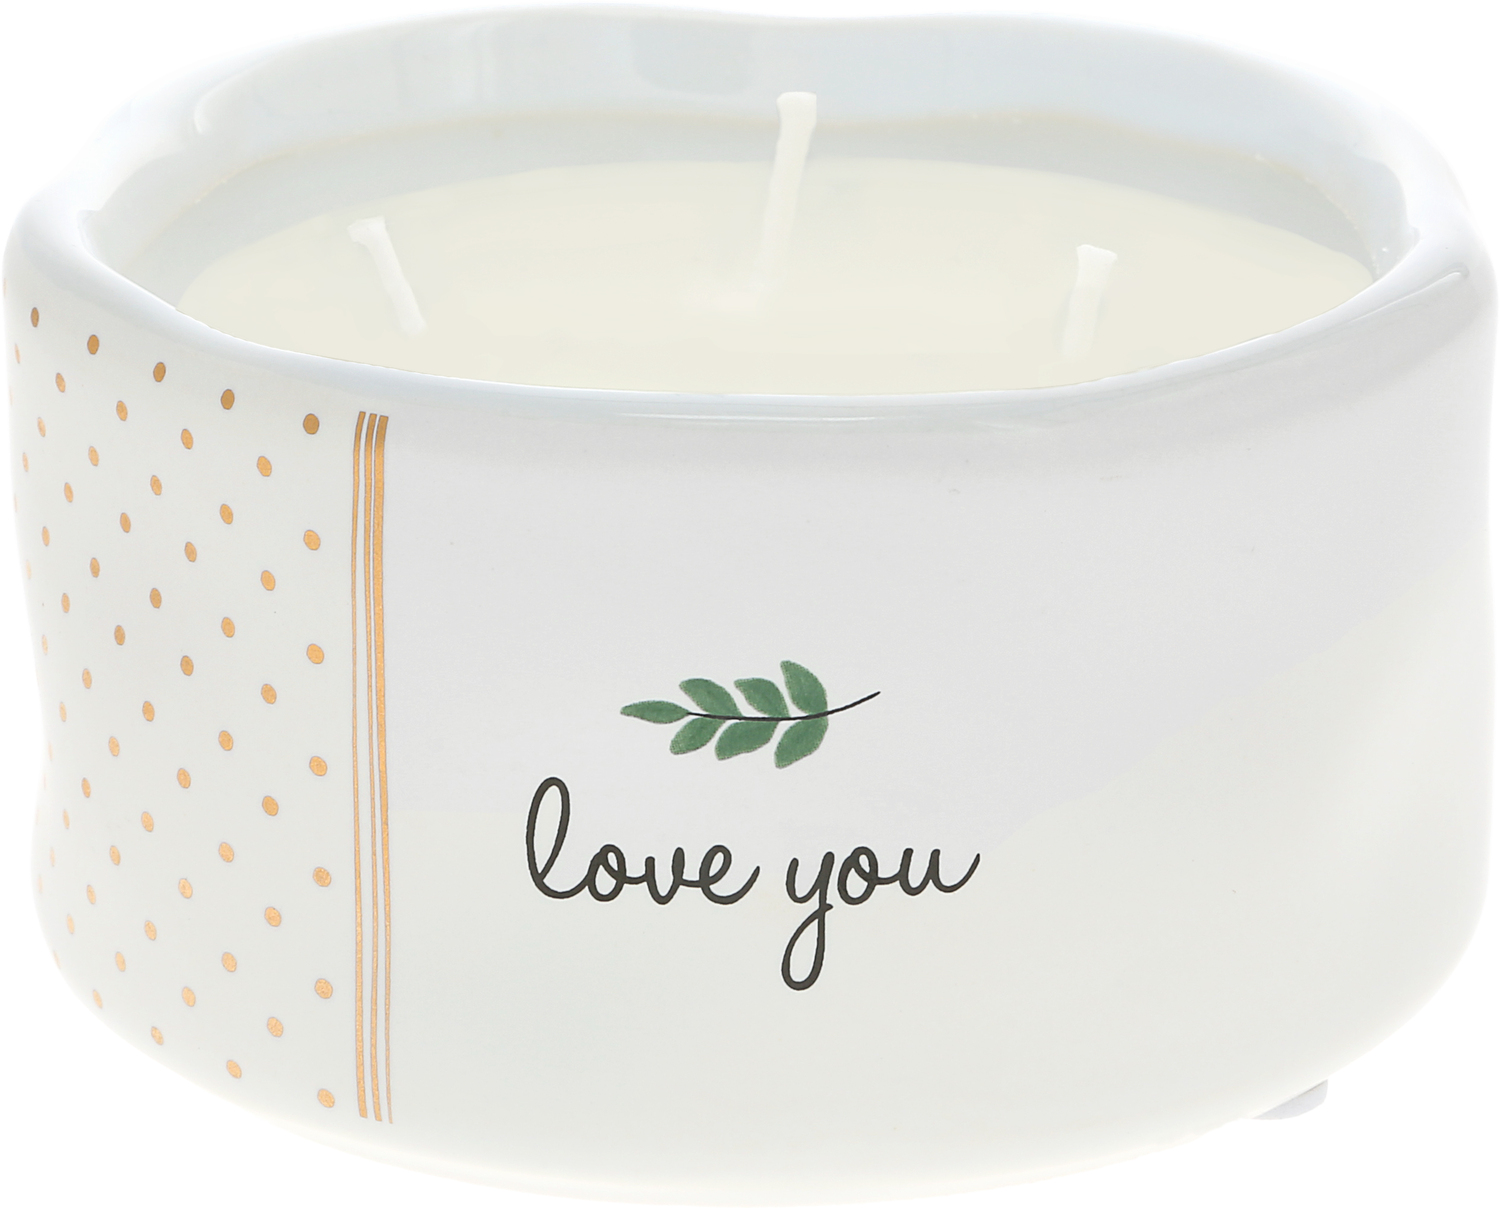 Love You by Love Grows - Love You - 8 oz - 100% Soy Wax Reveal Candle
Scent: Tranquility